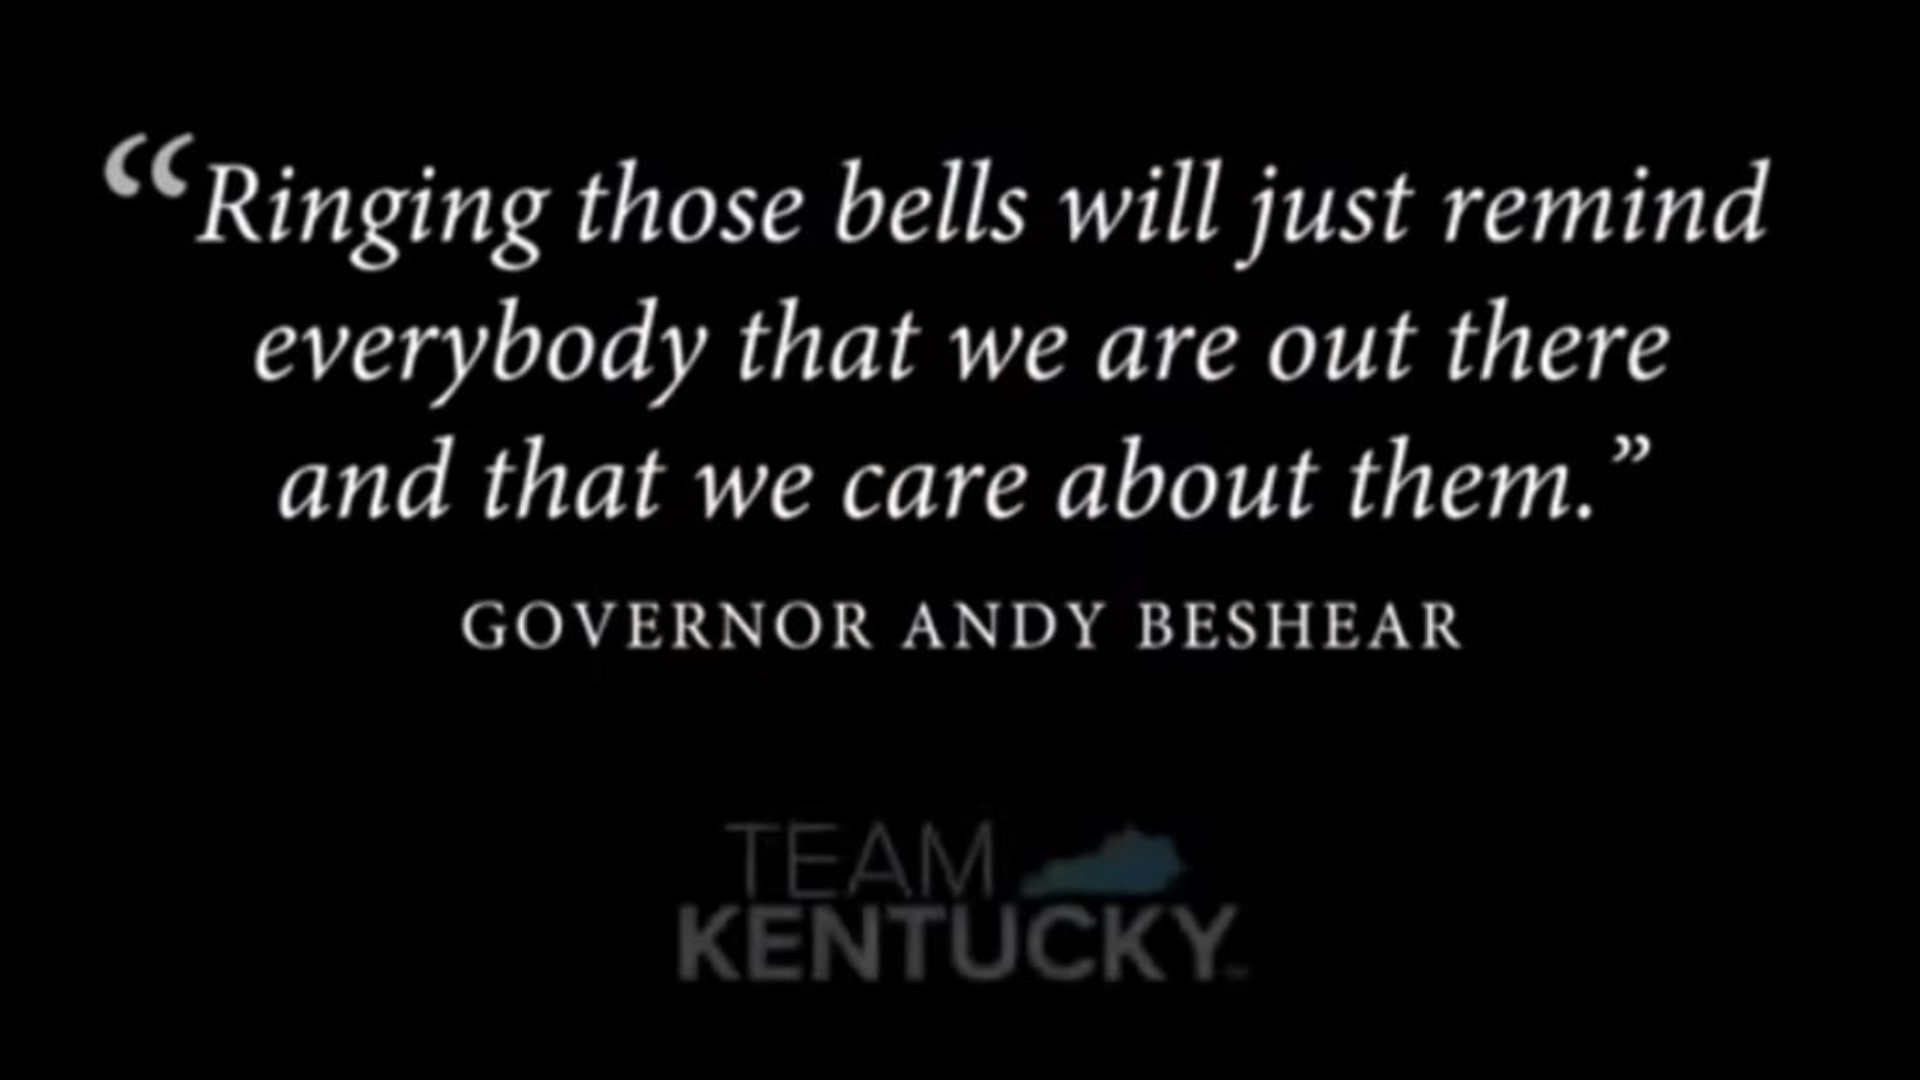 Kentucky Governor Andy Beshear with a look at COVID-19 coronavirus' impact across the Bluegrass state.